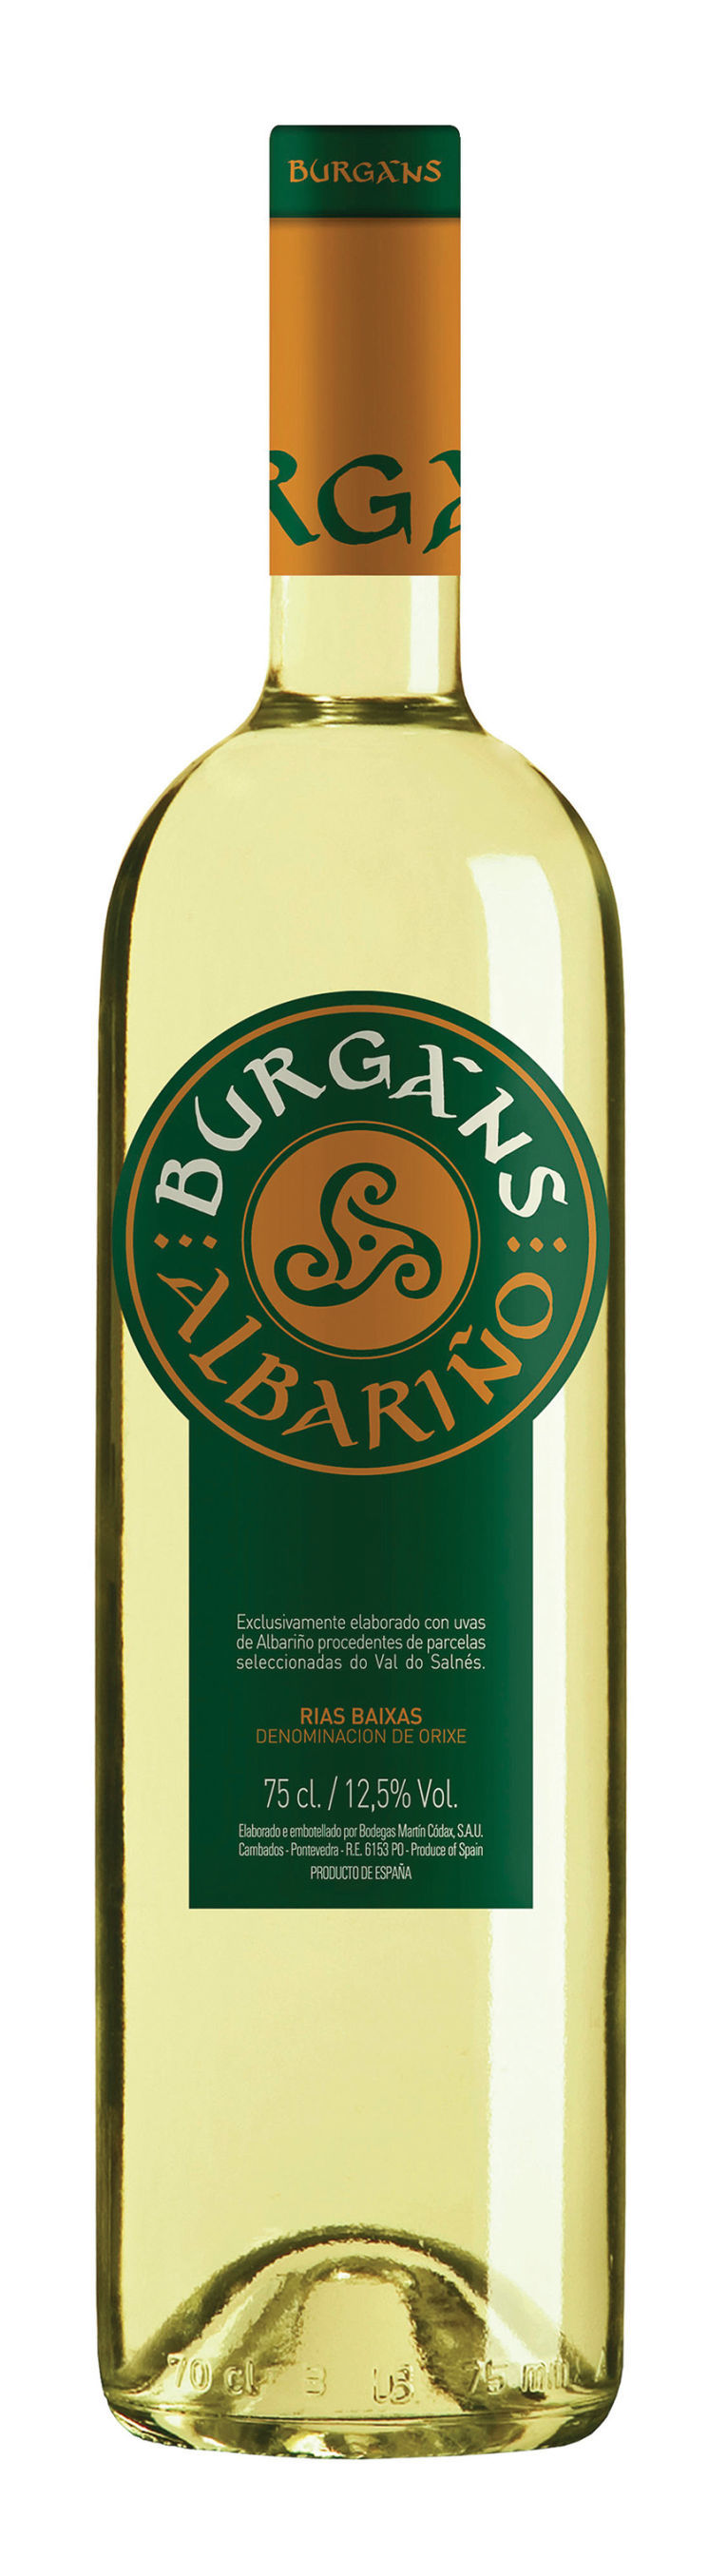 Grape Expectations: Albariño is perfect summer, seafood wine | Waco ...